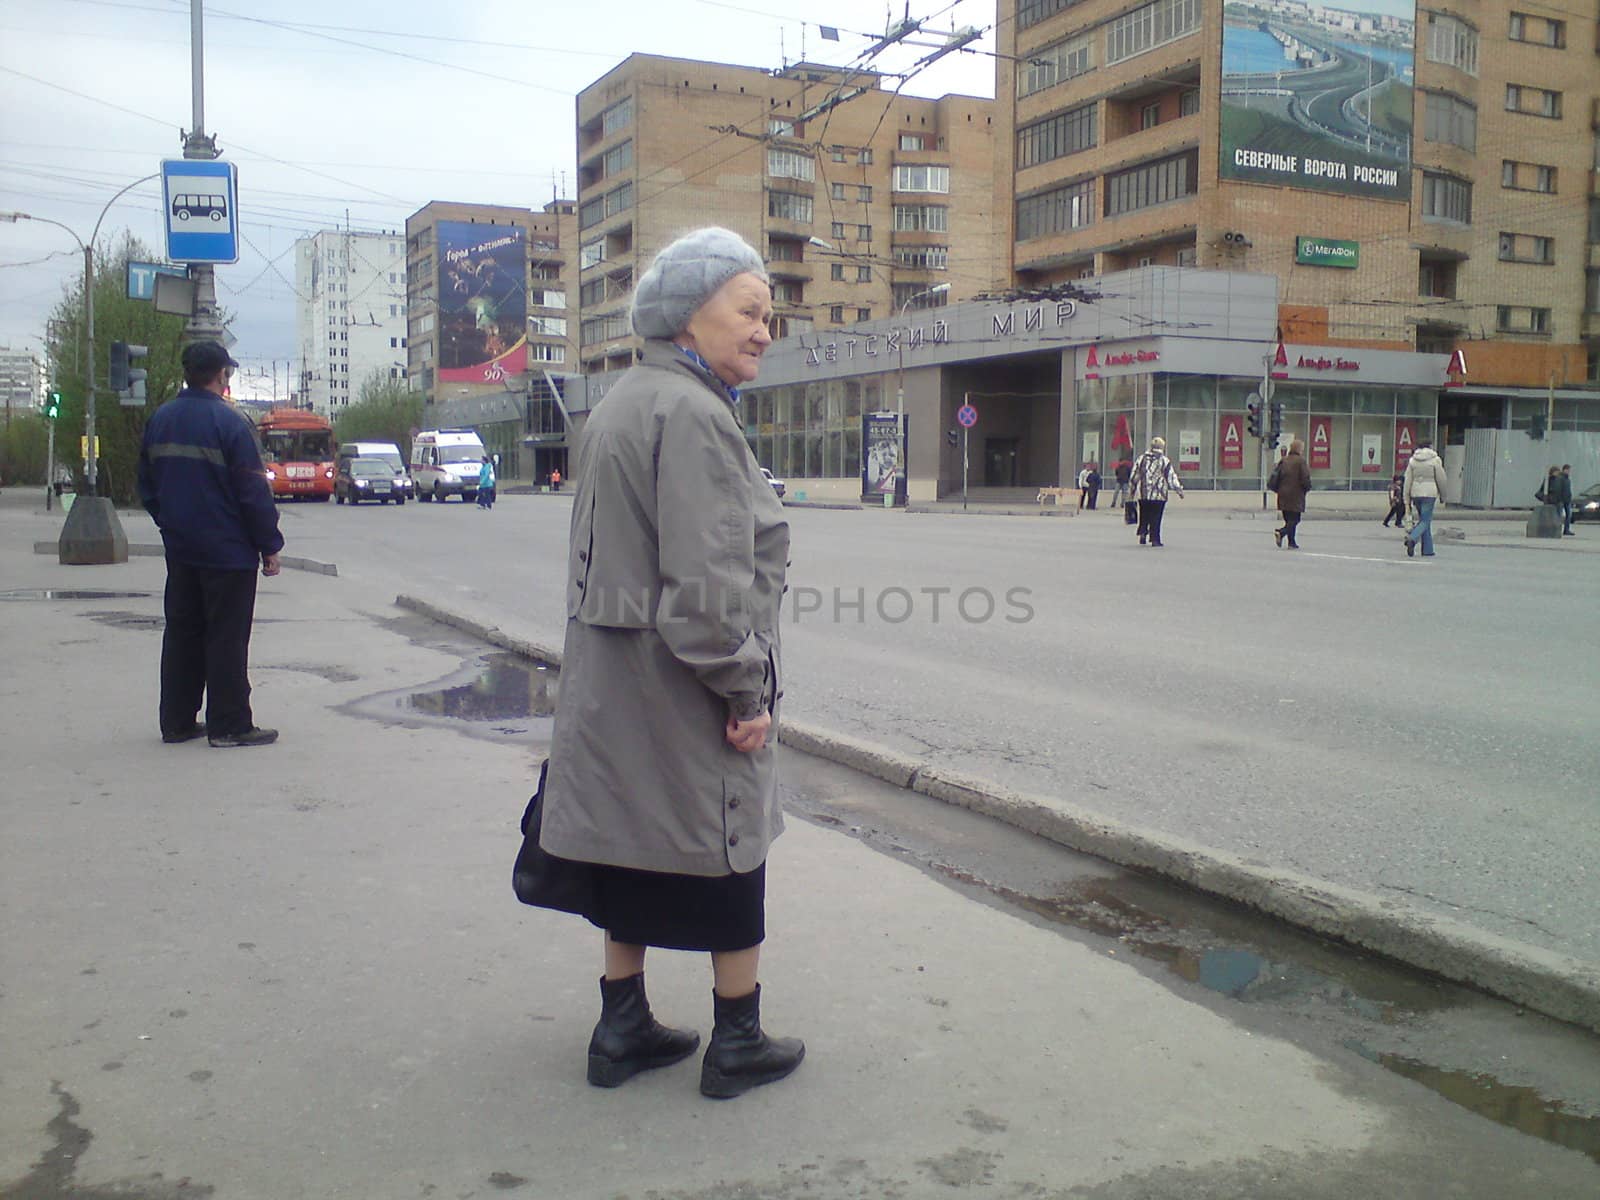 Fascinating old lady, waiting for the bus in centrum of Murmansk, Russia.